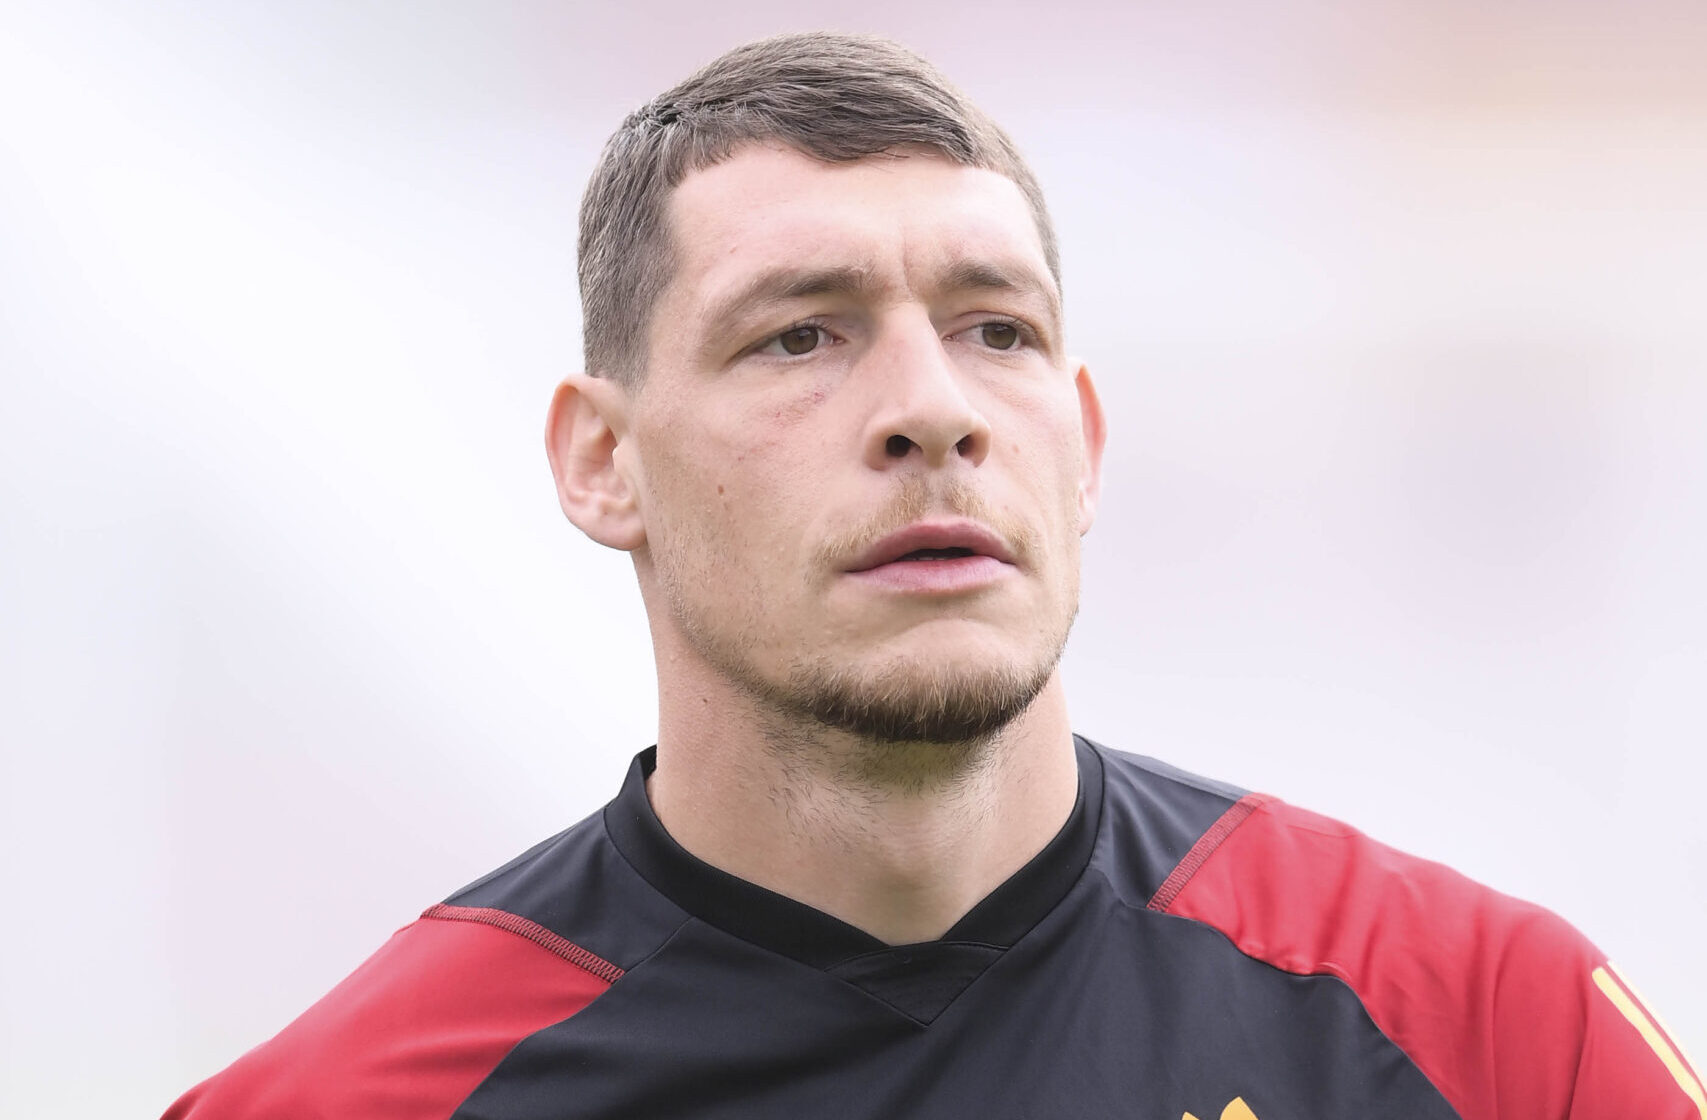 Roma and Fiorentina are discussing a trade between Andrea Belotti and Jonathan Ikoné, which has a few moving pieces and will need time.